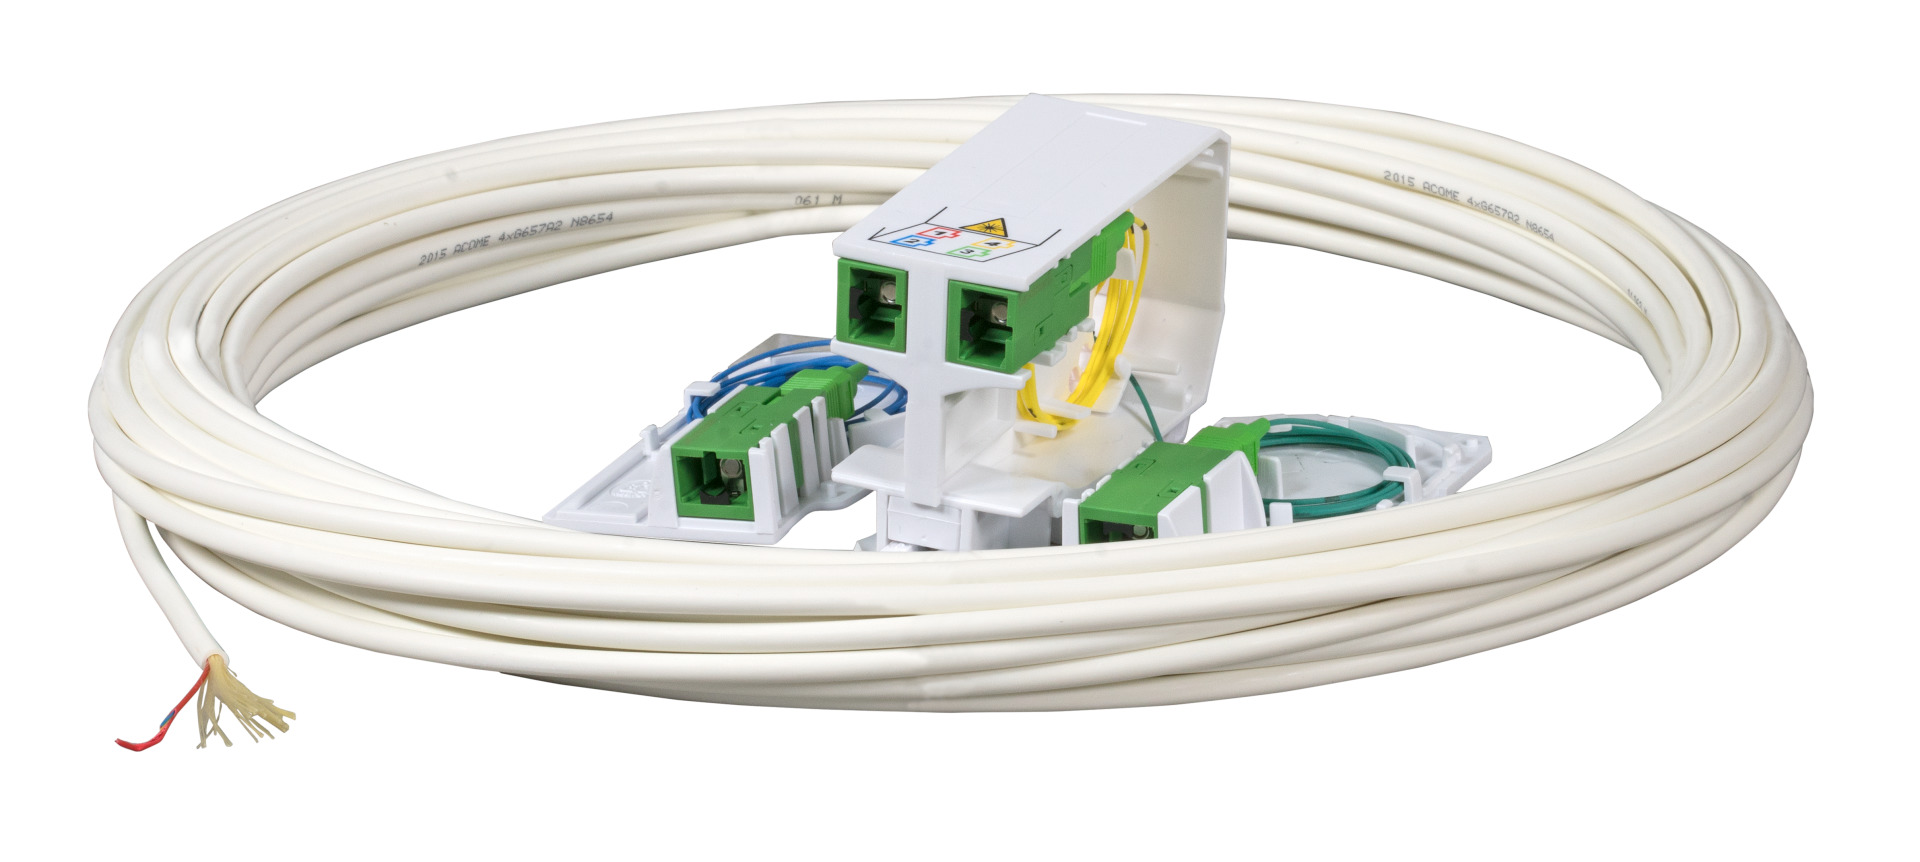 FTTH DIN RAIL Adapter,2x SC/APC adapter, Laserprotection integrated,100m DropCa